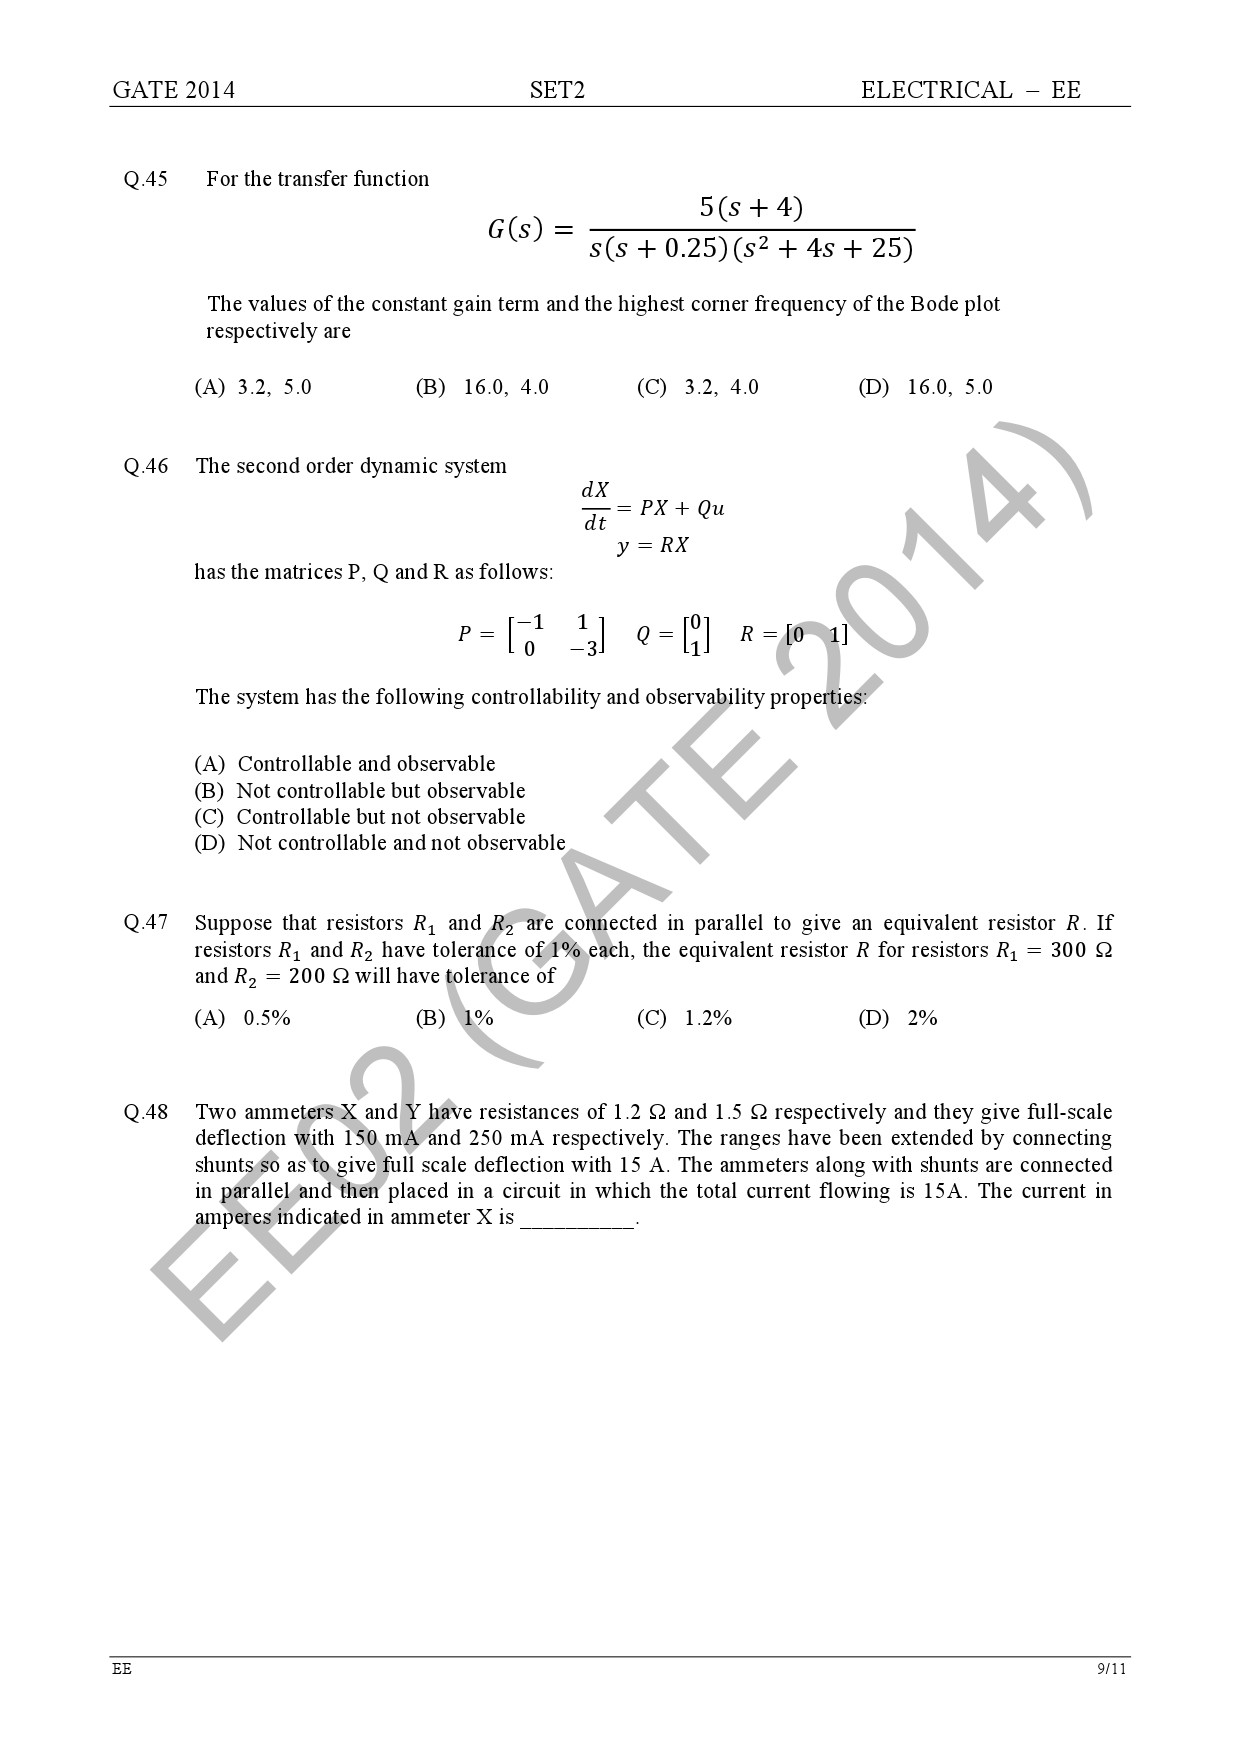 GATE Exam Question Paper 2014 Electrical Engineering Set 2 15